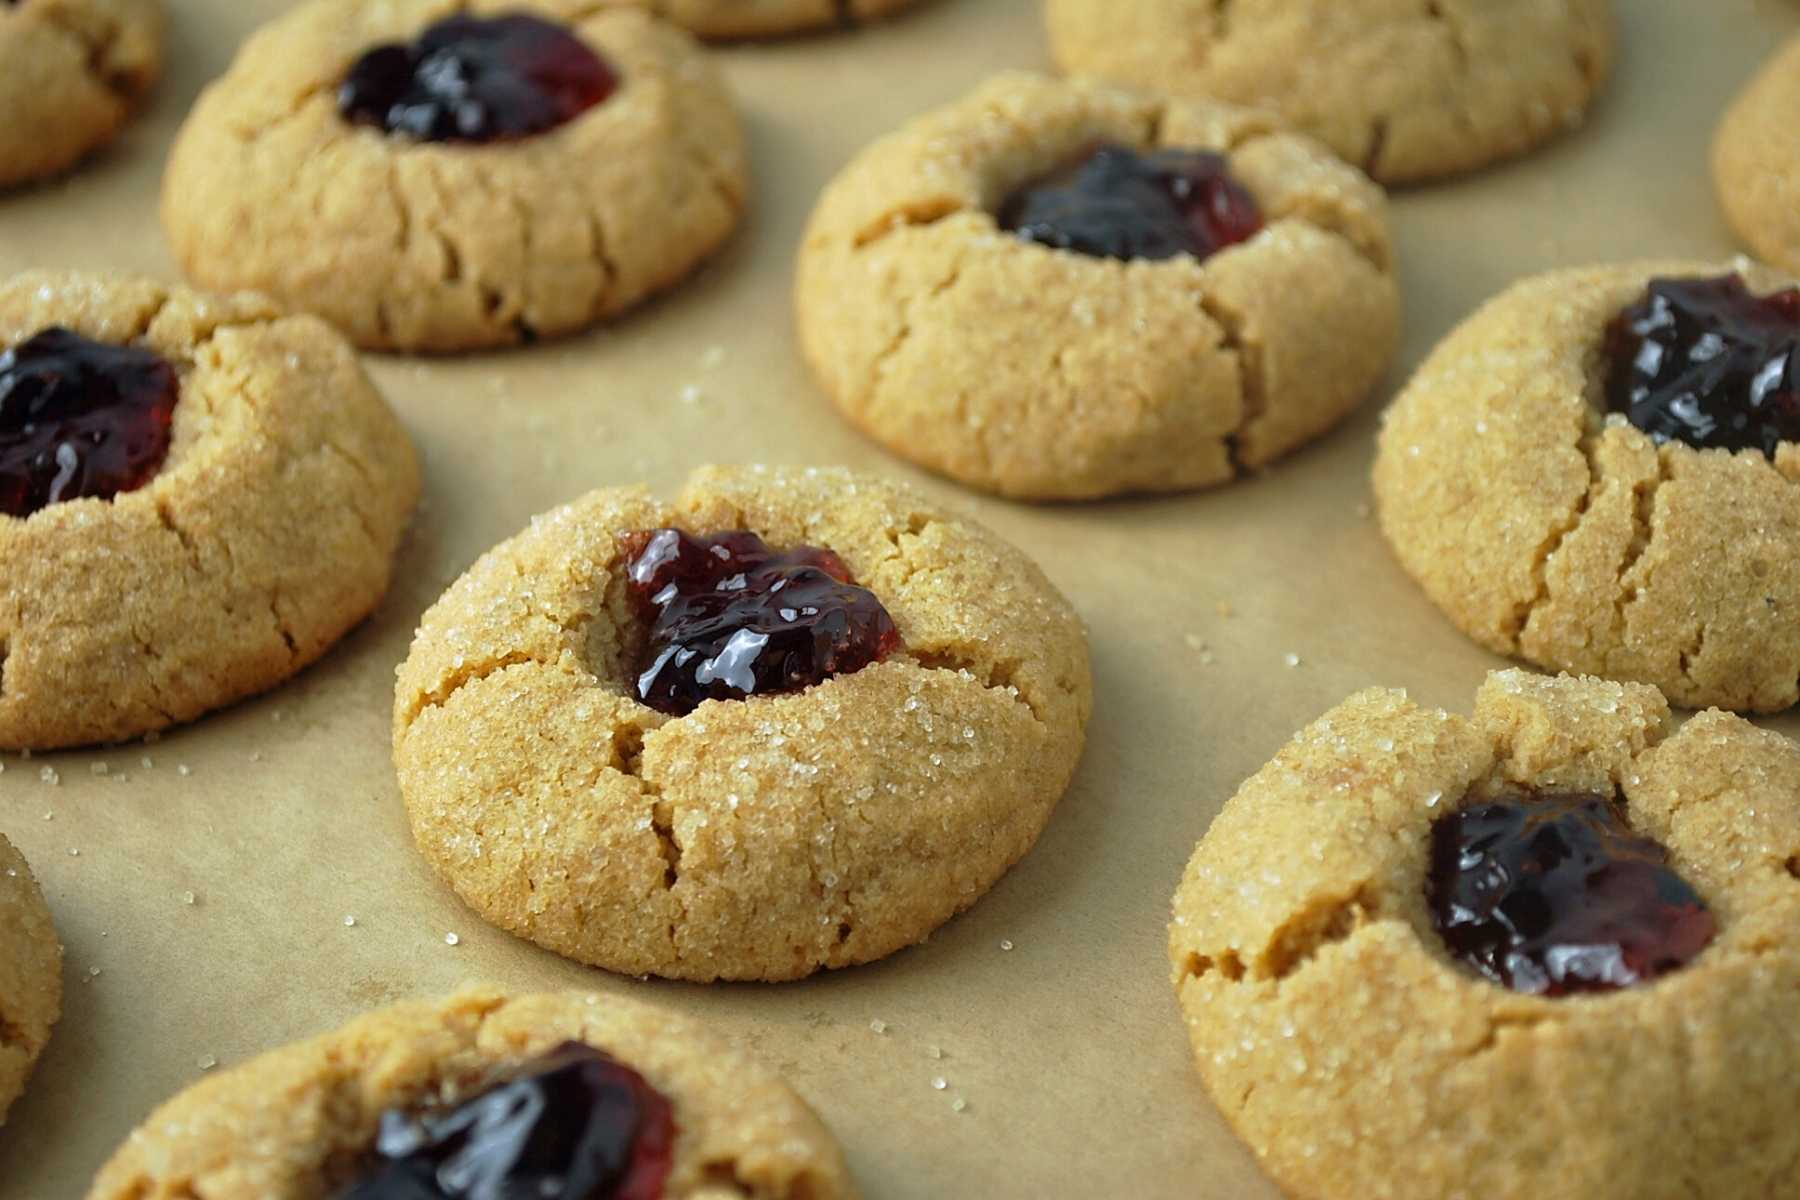 jam thumbprint cookies fresh from the oven on a baking sheet